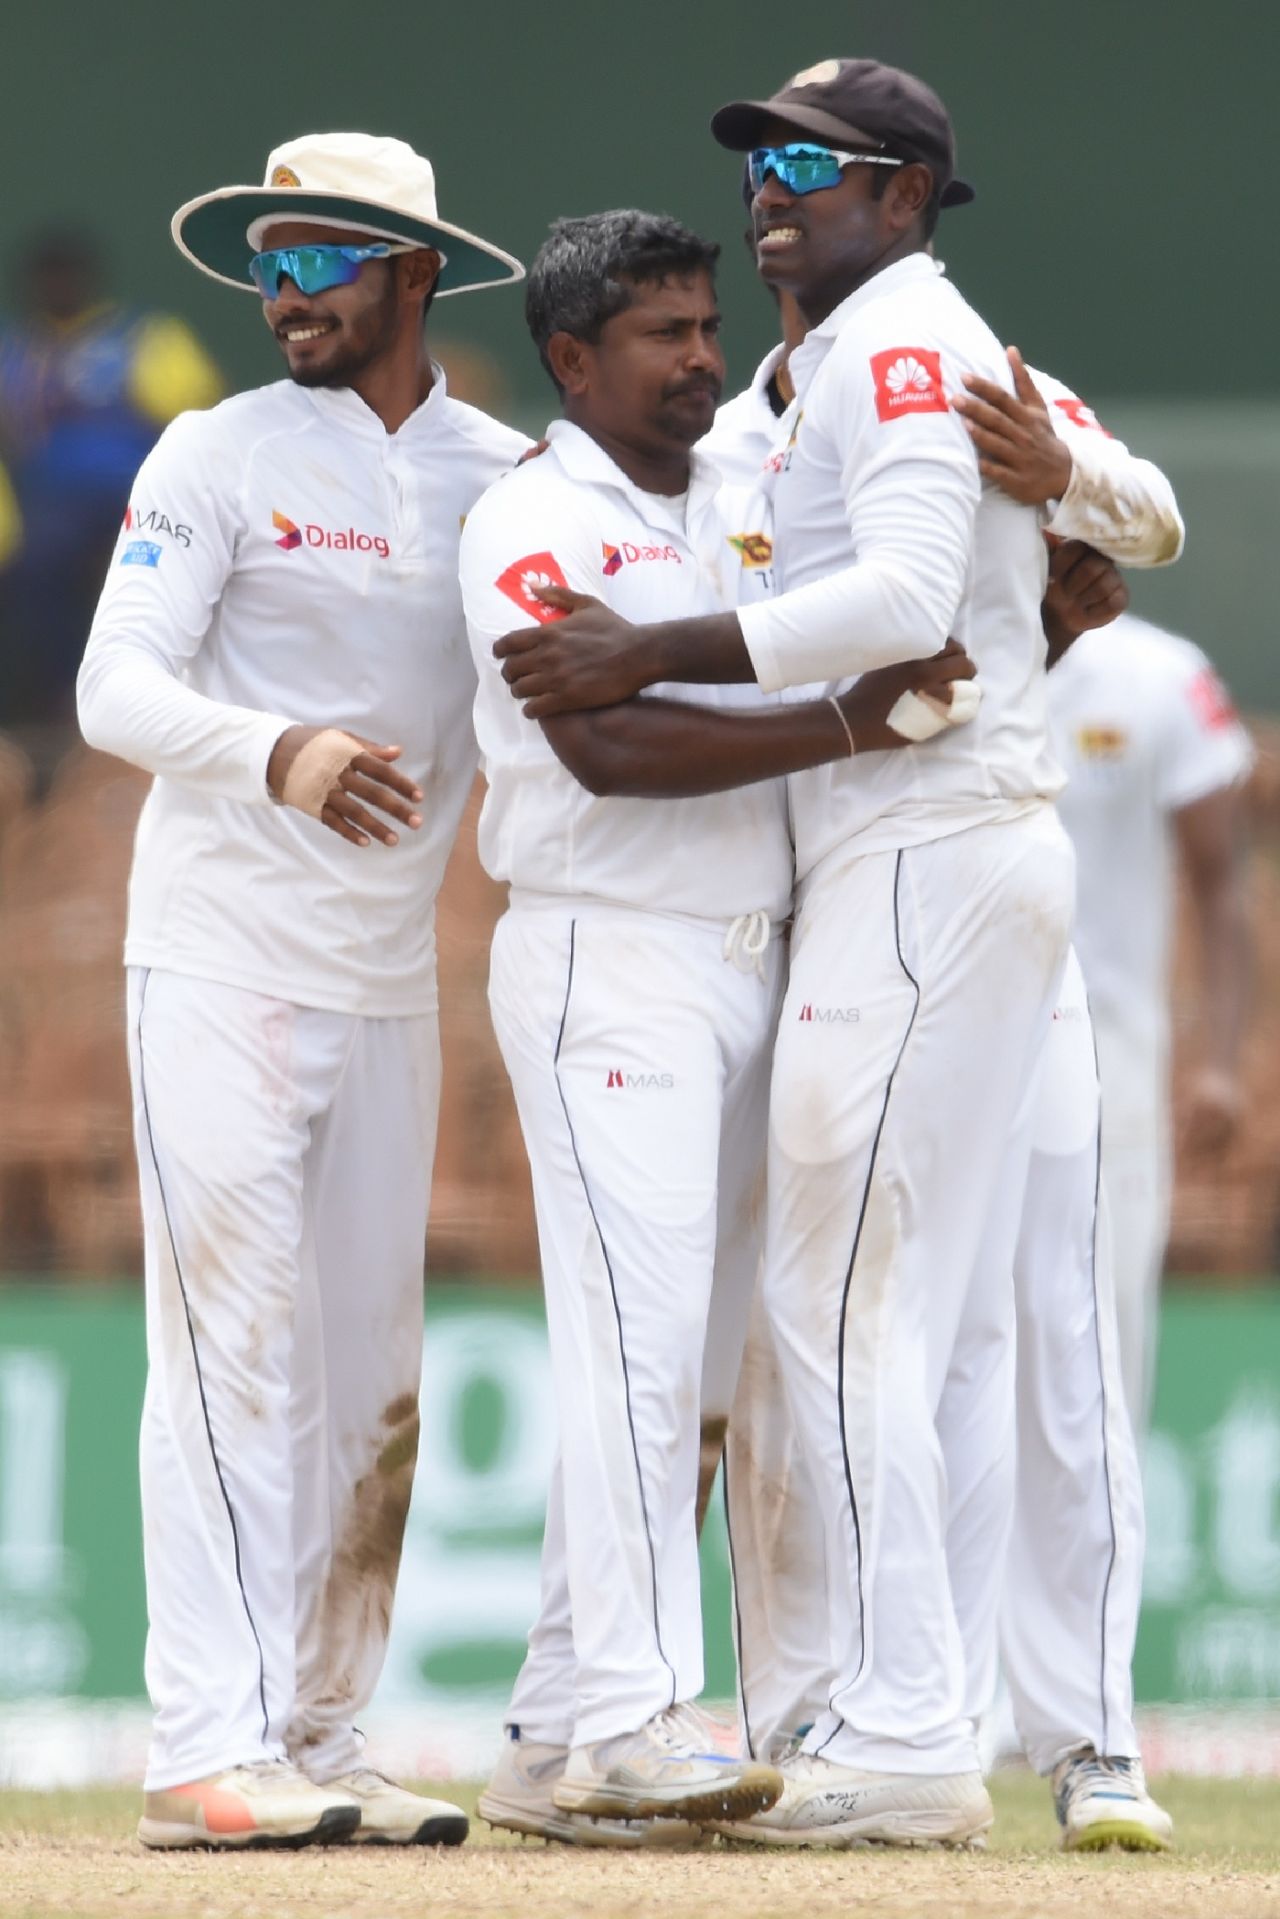 Rangana Herath celebrates a wicket with his team-mates, Sri Lanka v South Africa, 2nd Test, SSC, 4th day, July 23, 2018